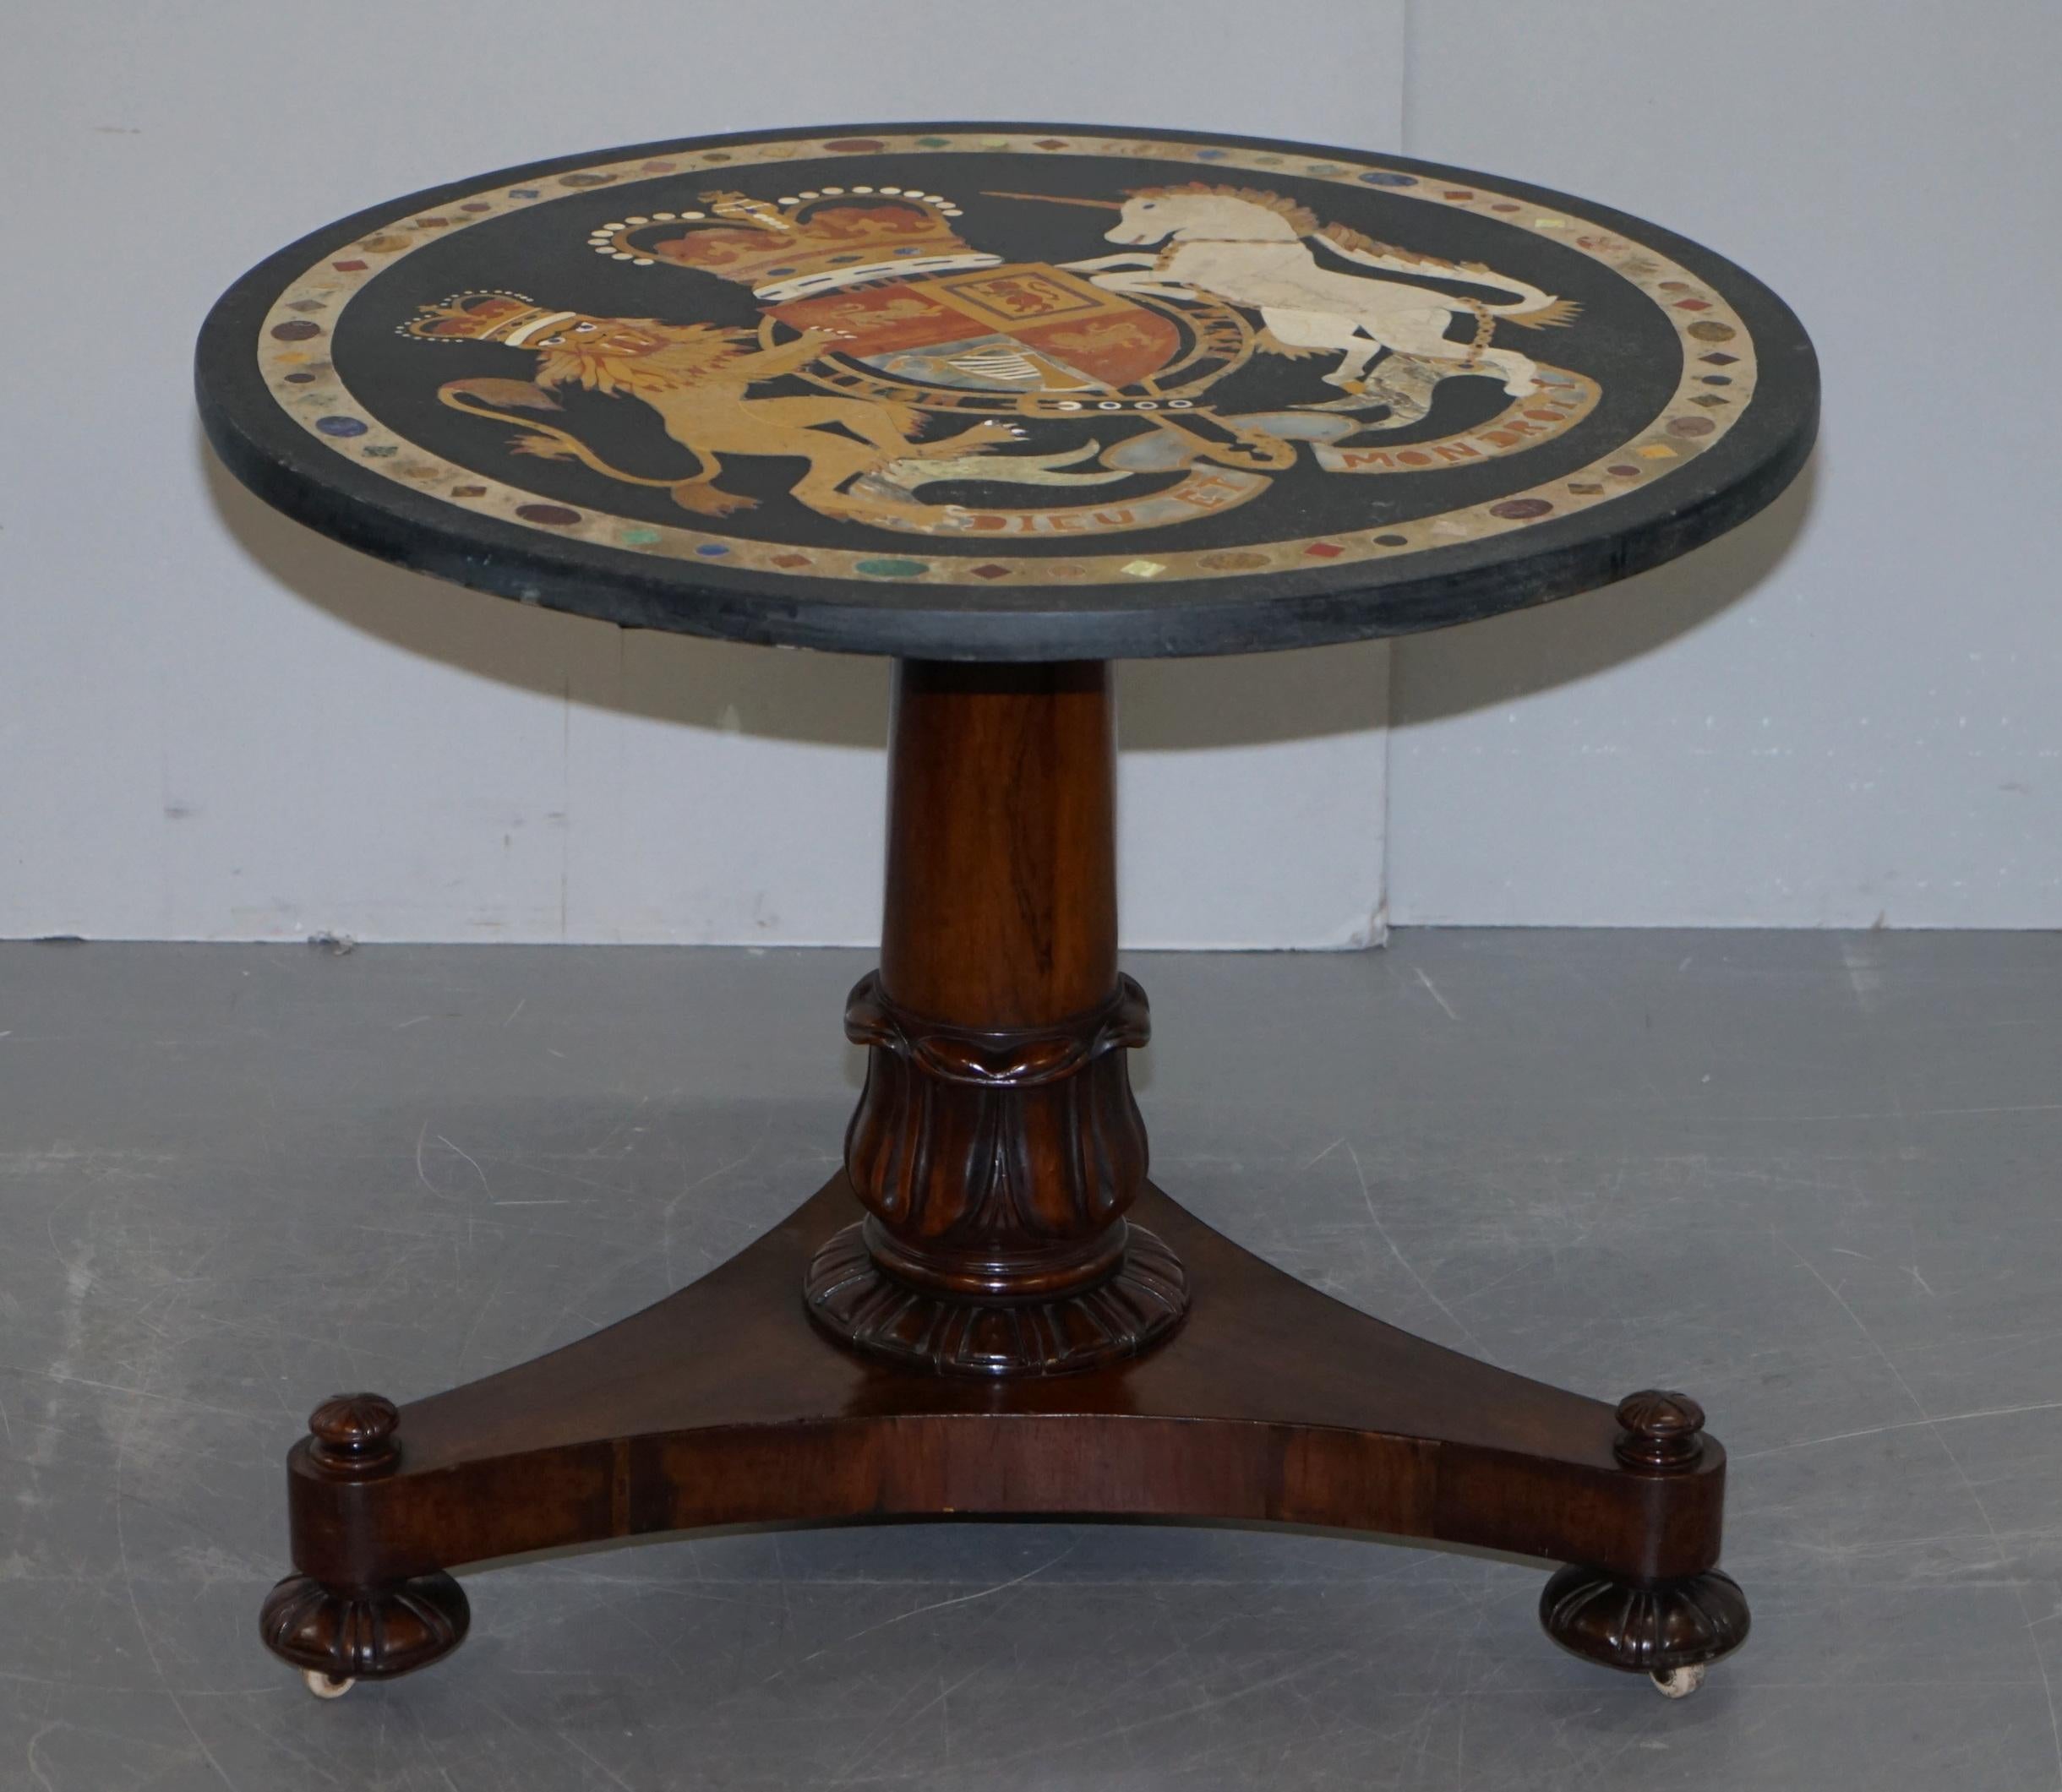 Wimbledon-Furniture

Wimbledon-Furniture is delighted to offer for sale this stunning fully restored circa 1860 Pietra Dura Specimen marble and slate occasional centre table with large armorial crest coat of arms sitting on a circa 1830 William IV